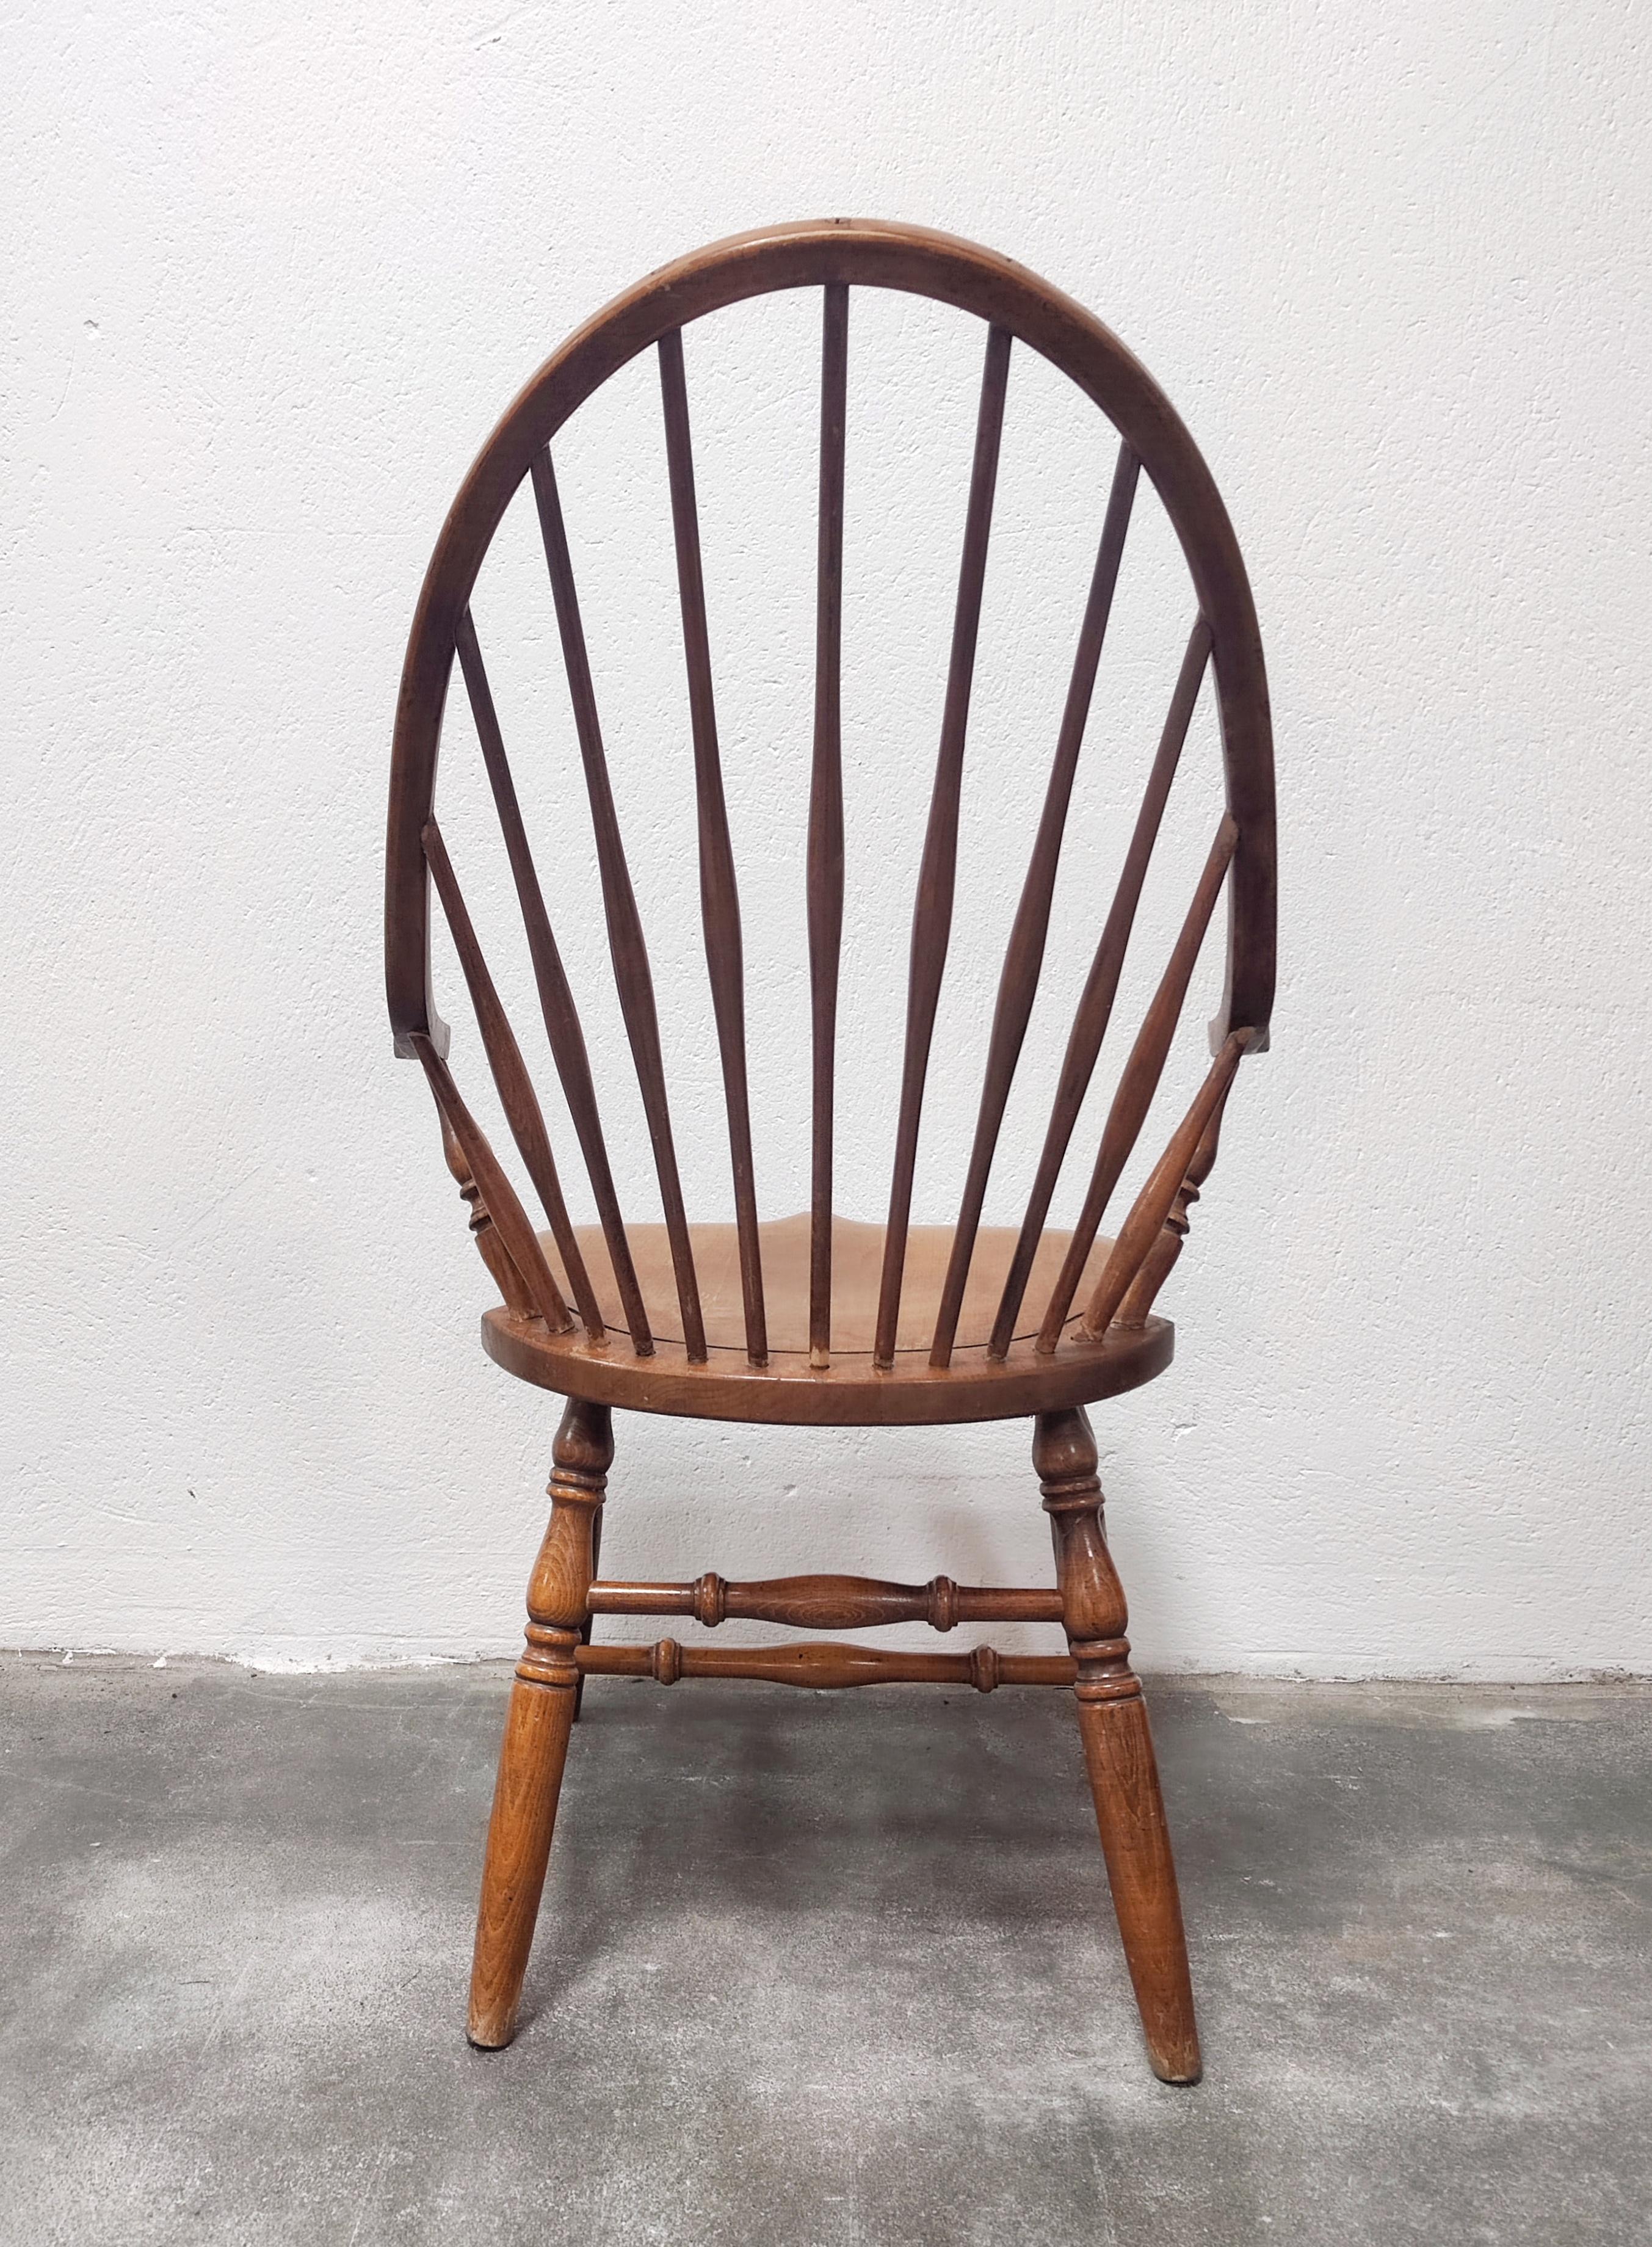 Rare Yugoslavian Windsor Tall Spindle Back Armchair in Beech, Slovenia 1950s For Sale 1